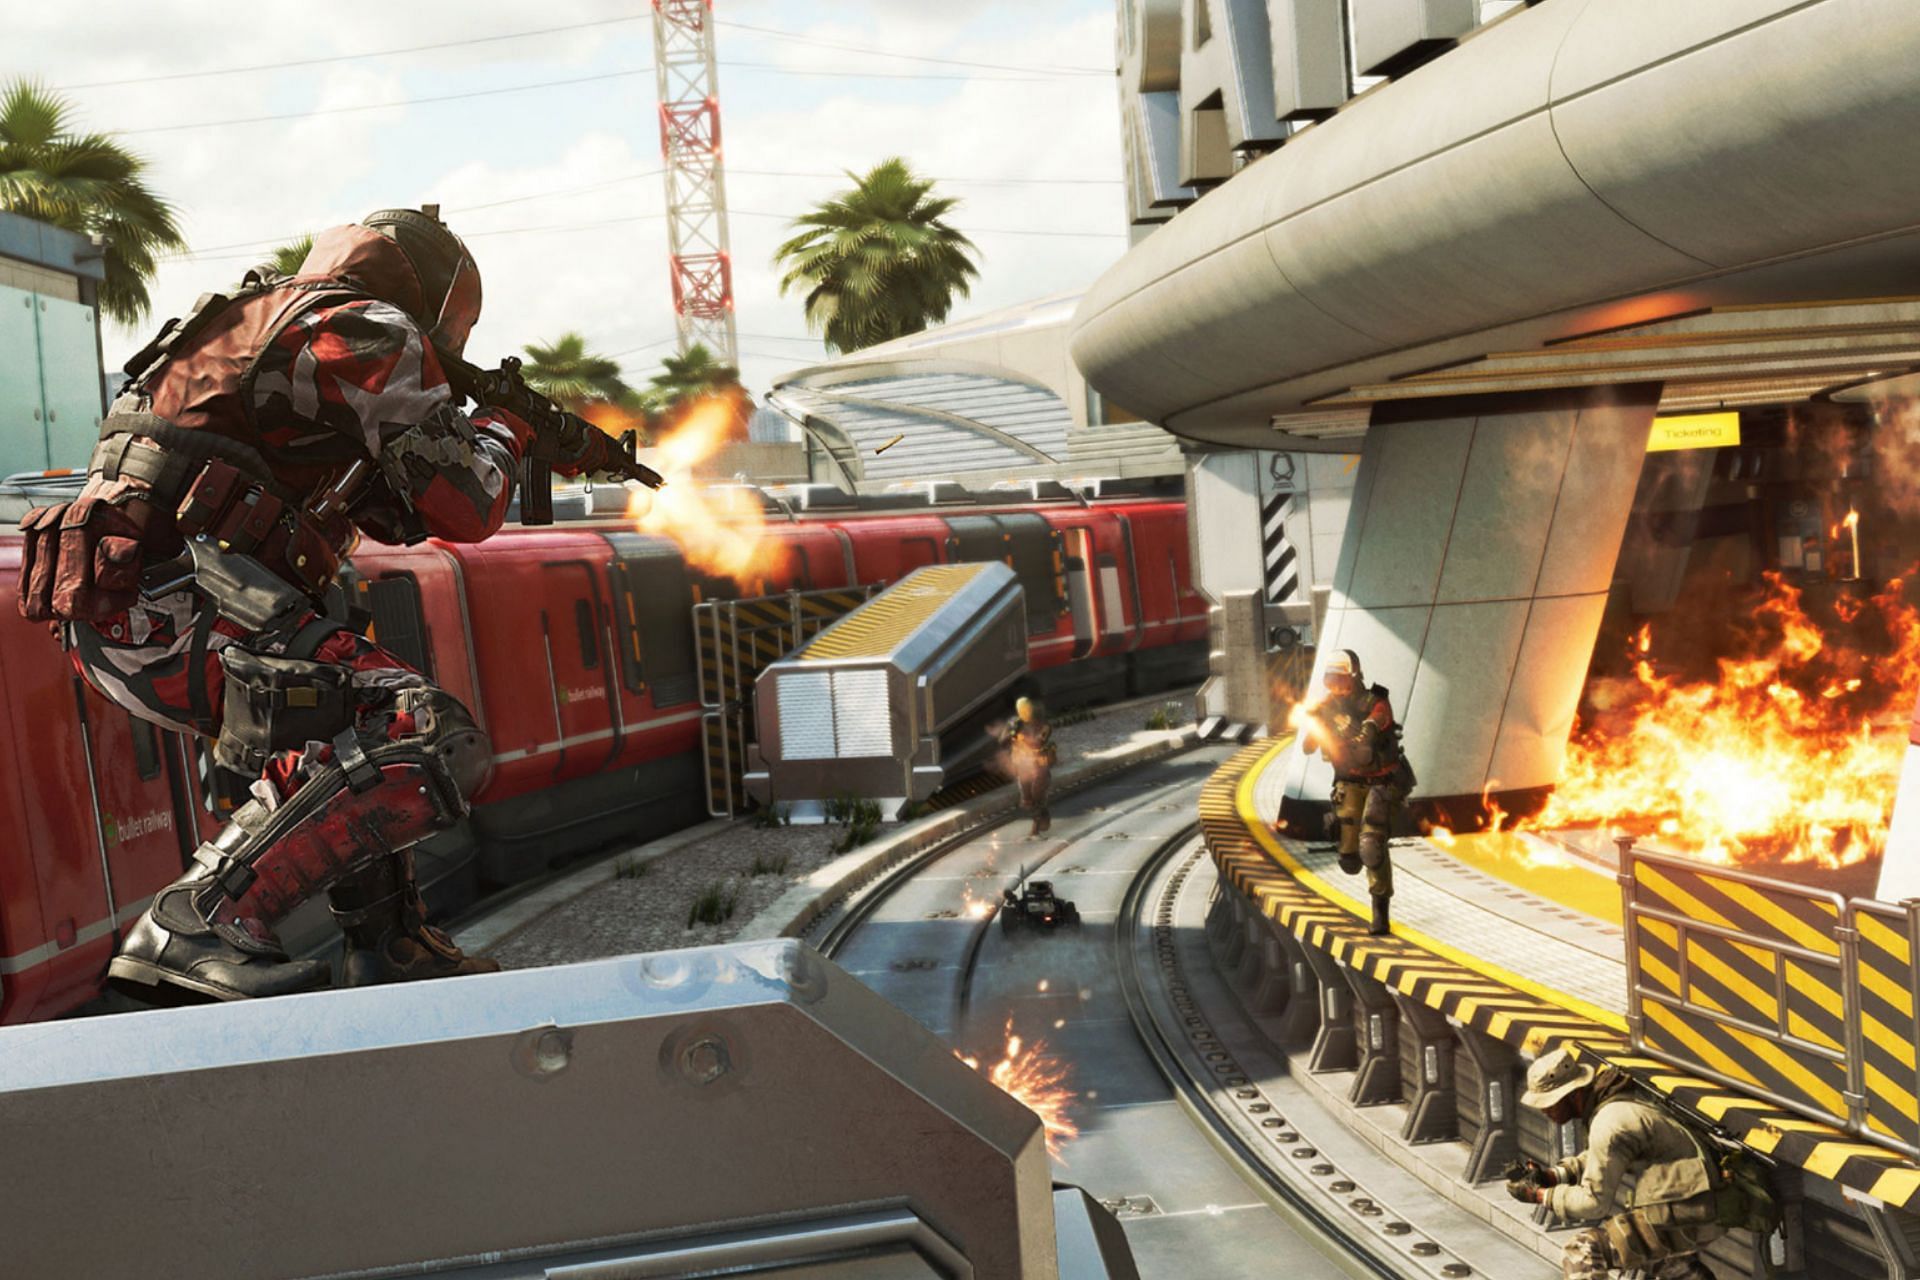 Call of Duty Mobile boasts a high-octane, action-packed gaming experience (Image via Activision)